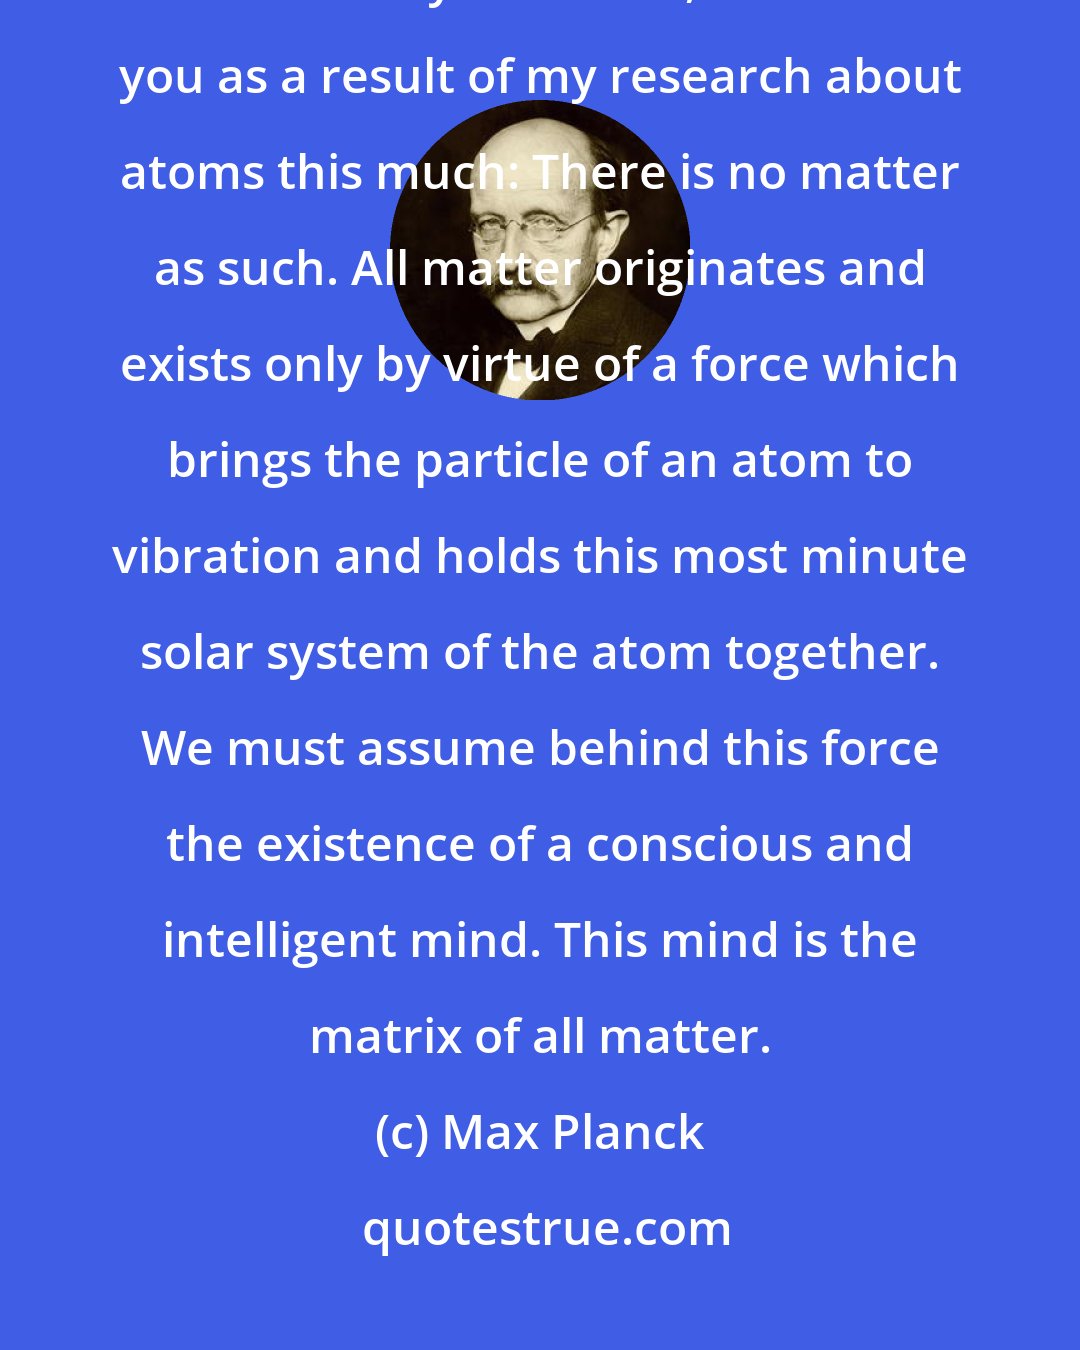 Max Planck: As a man who has devoted his whole life to the most clear headed science, to the study of matter, I can tell you as a result of my research about atoms this much: There is no matter as such. All matter originates and exists only by virtue of a force which brings the particle of an atom to vibration and holds this most minute solar system of the atom together. We must assume behind this force the existence of a conscious and intelligent mind. This mind is the matrix of all matter.